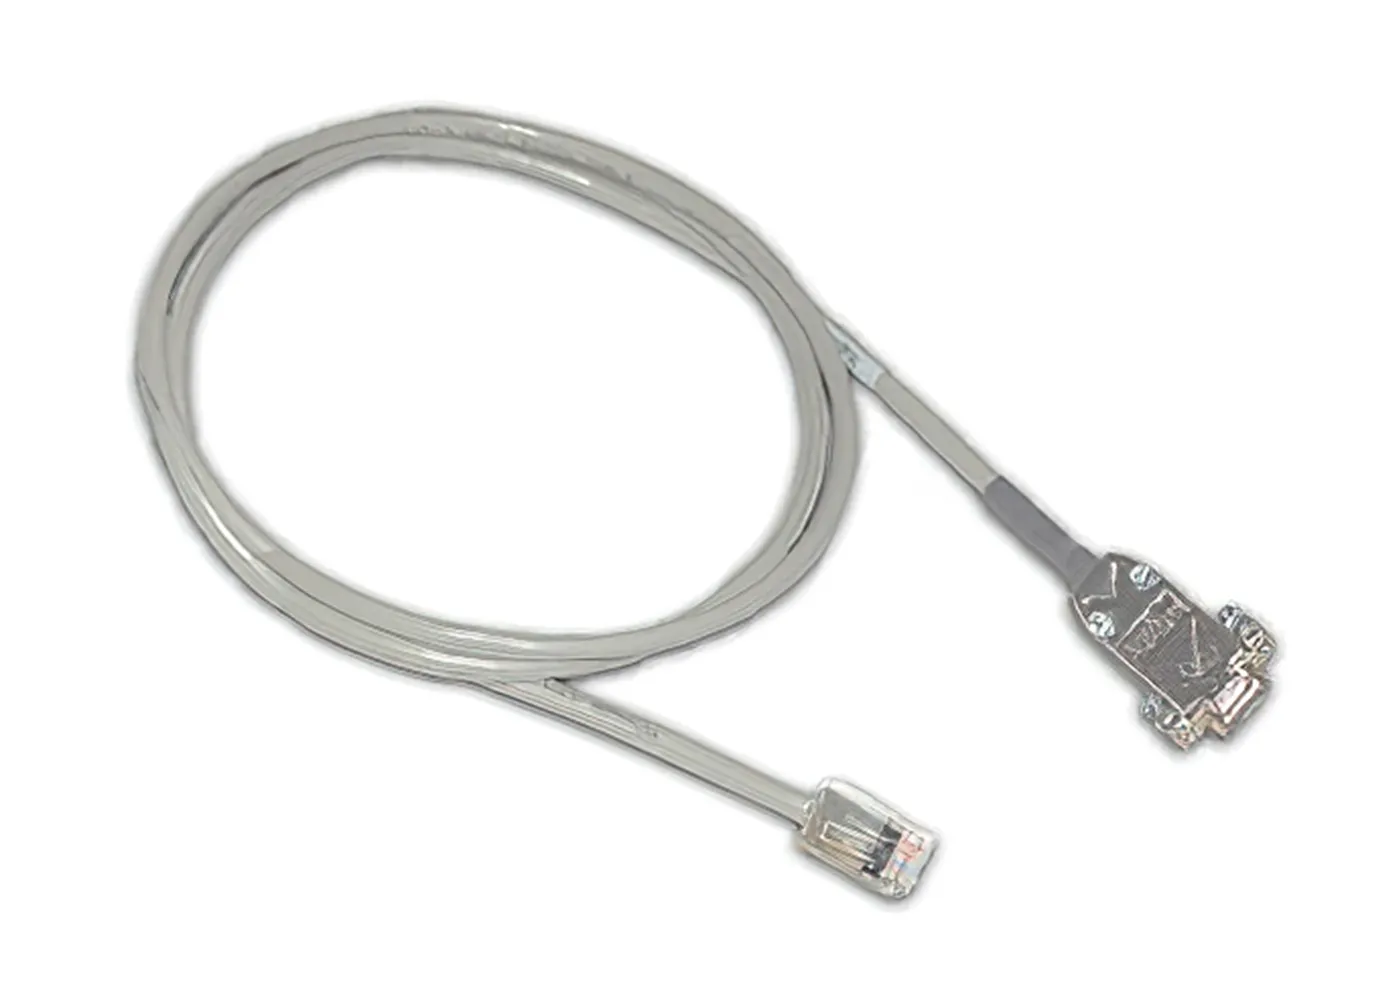 Cable, Configuration, RJ45/232/9S, 5'<br/>

<span class="clsSpnProdMdls">For OIT Series only</span>